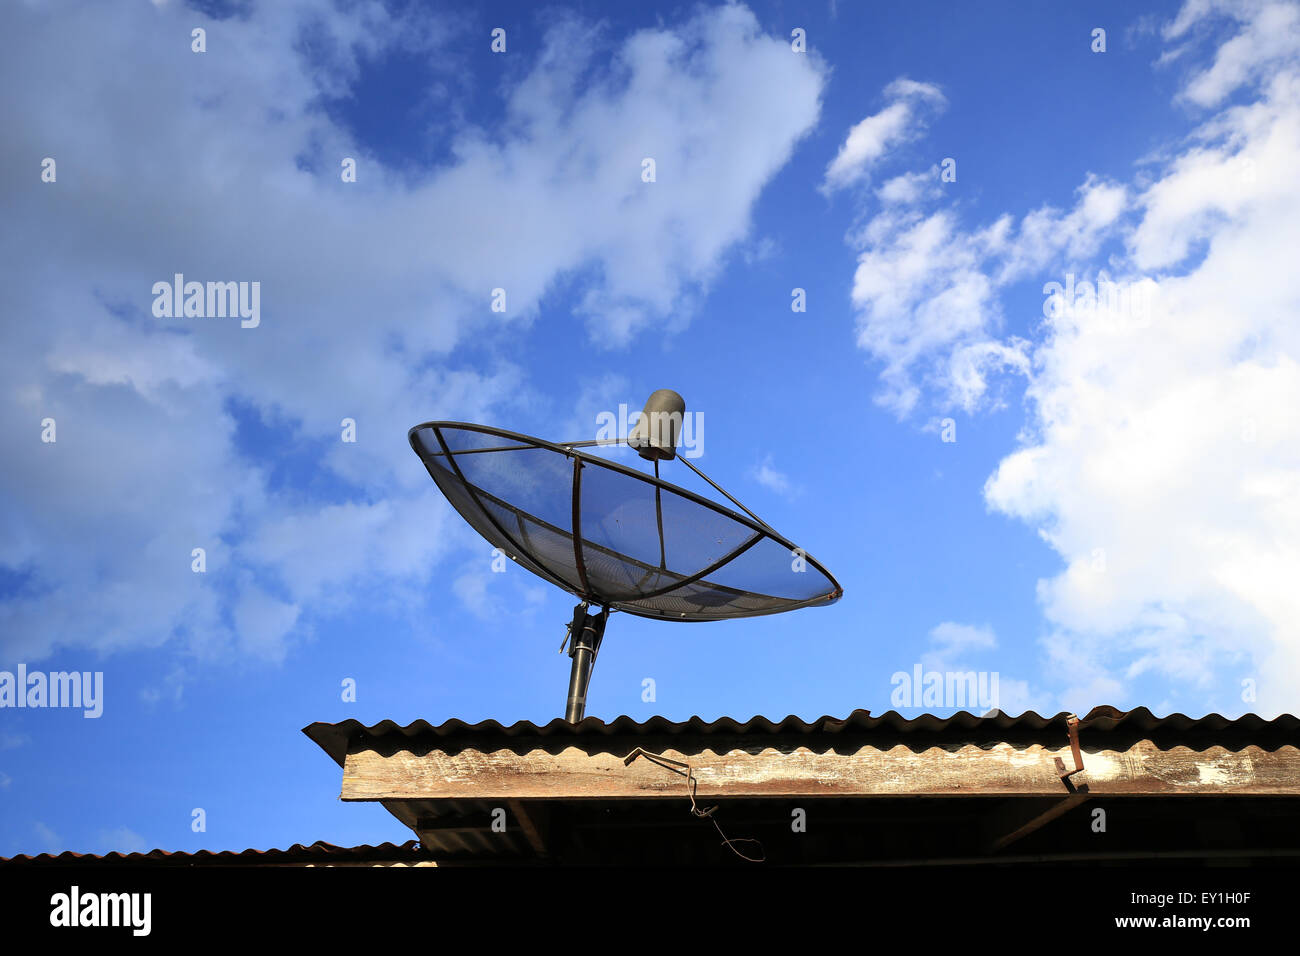 Satellite dish with blue sky and cloud background Stock Photo